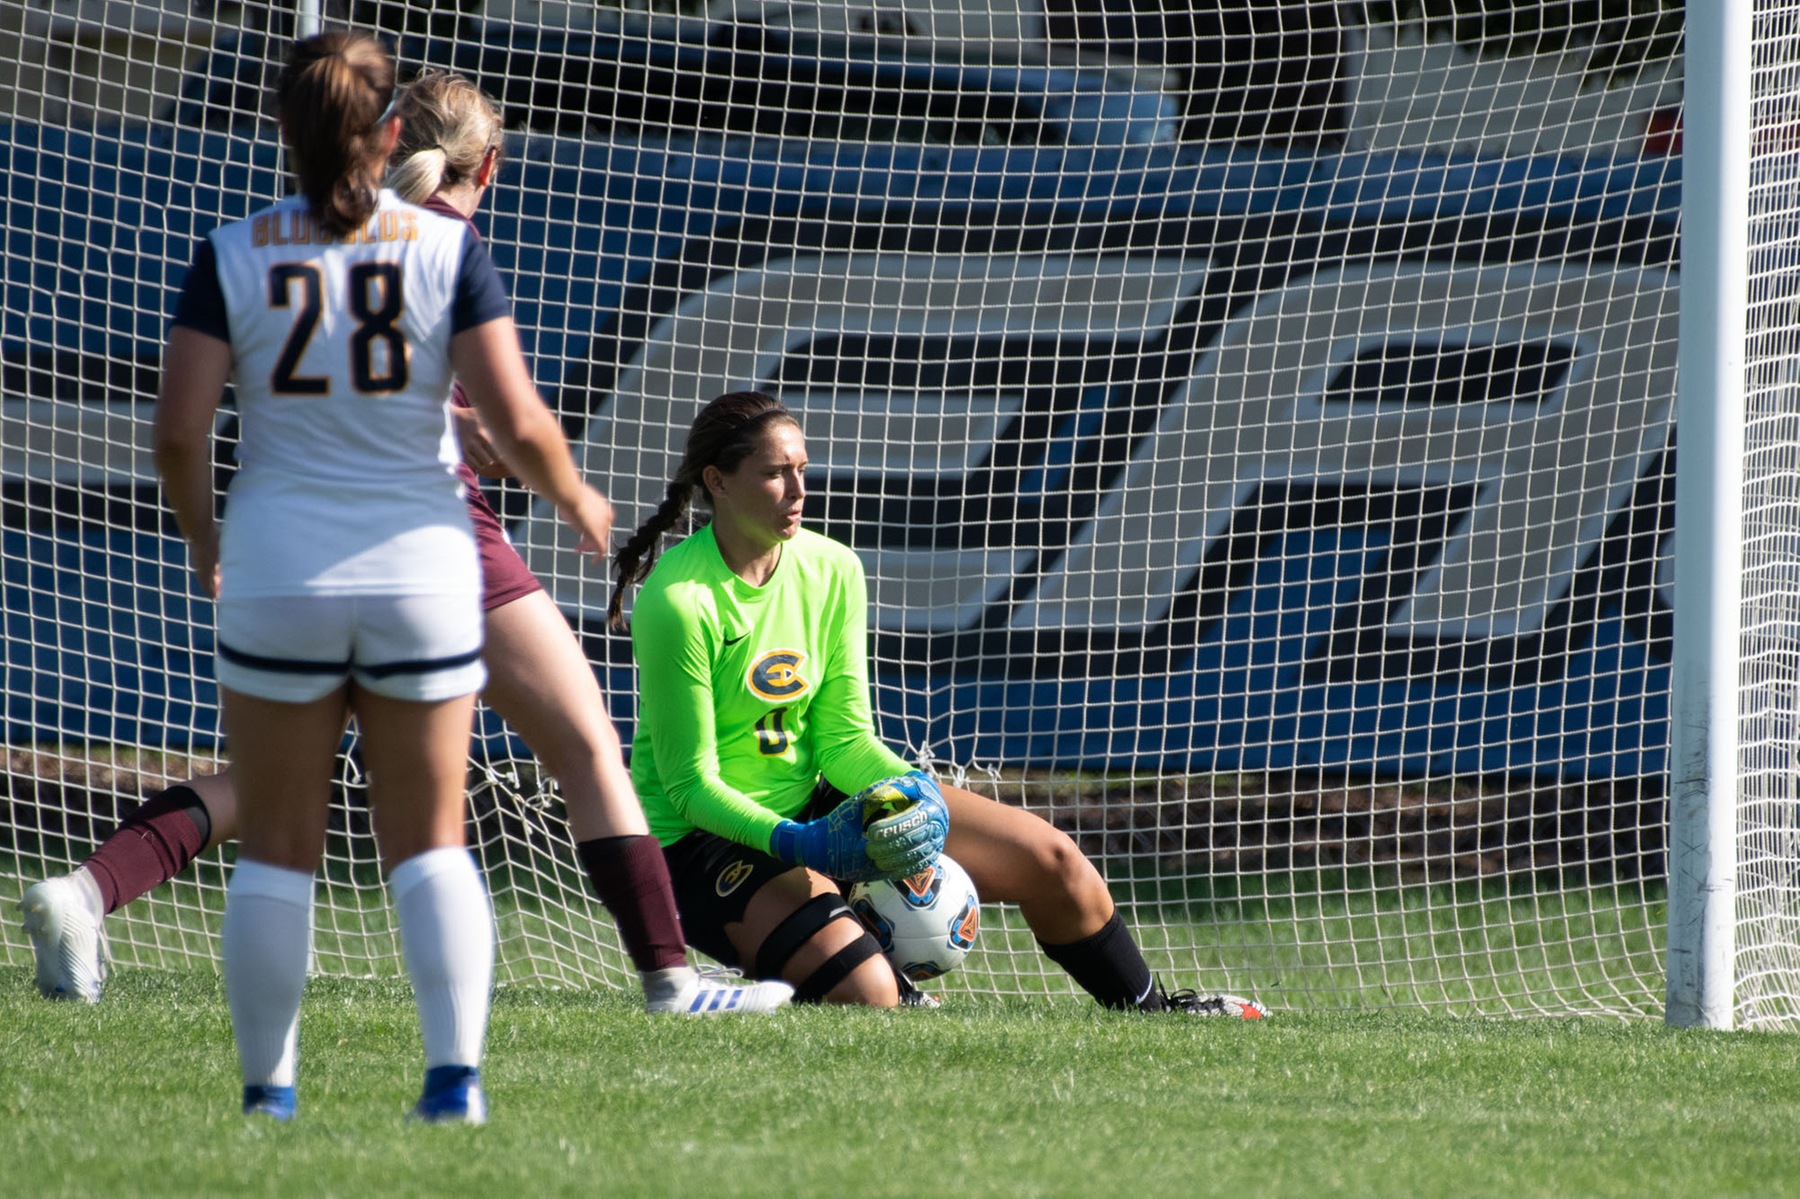 Women's Soccer records eighth shutout of the season with 2-0 win over Falcons